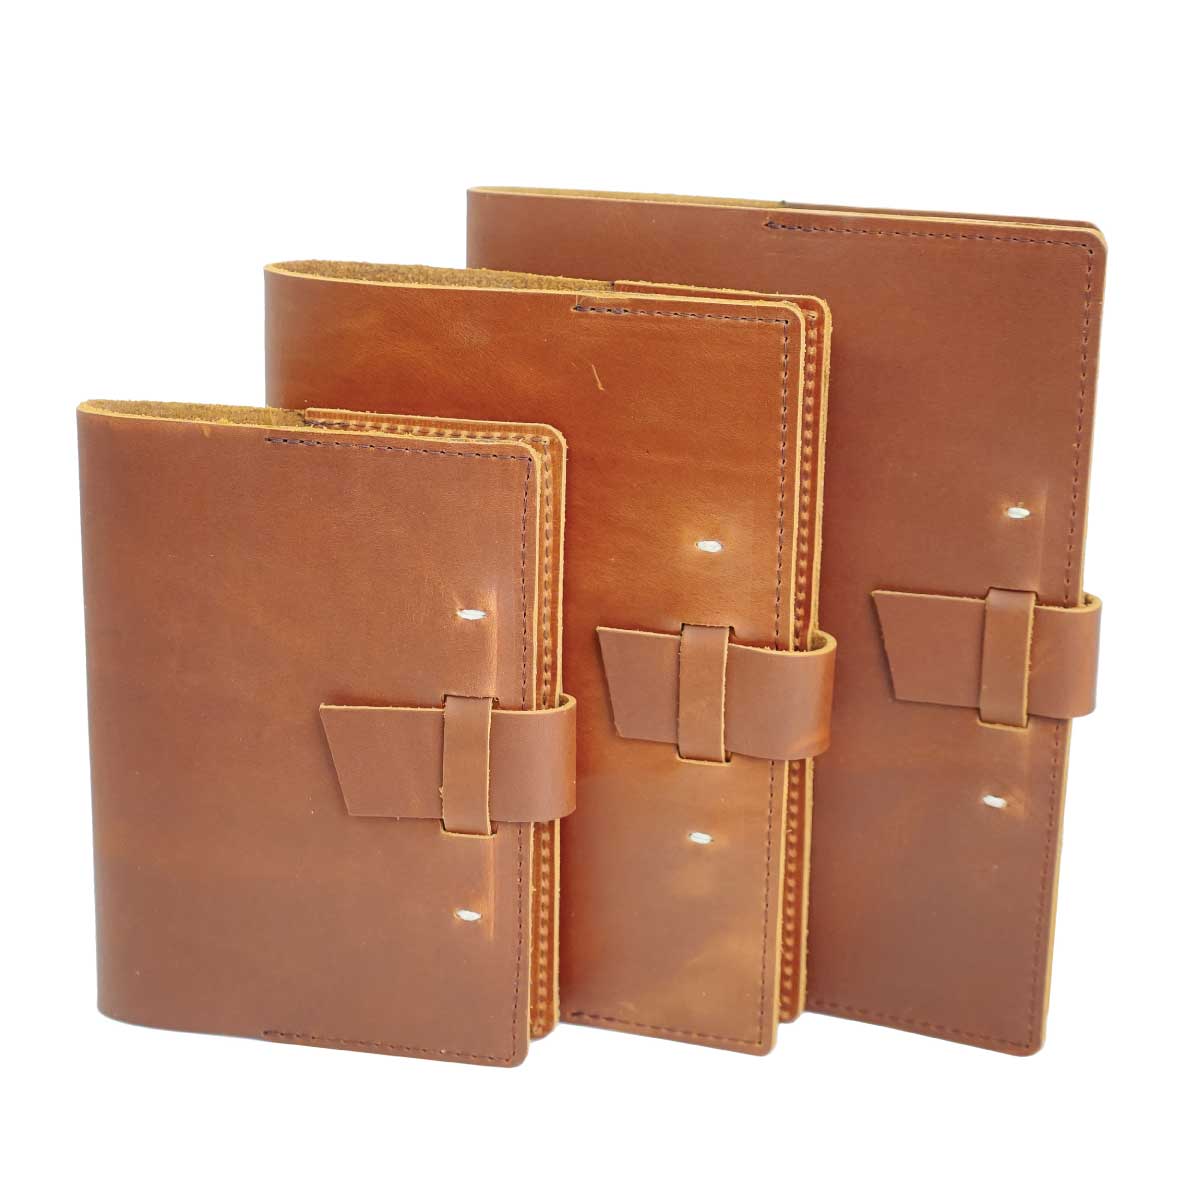 Rustico BK0205-0005 Switchback Leather Notebook Medium in Natural